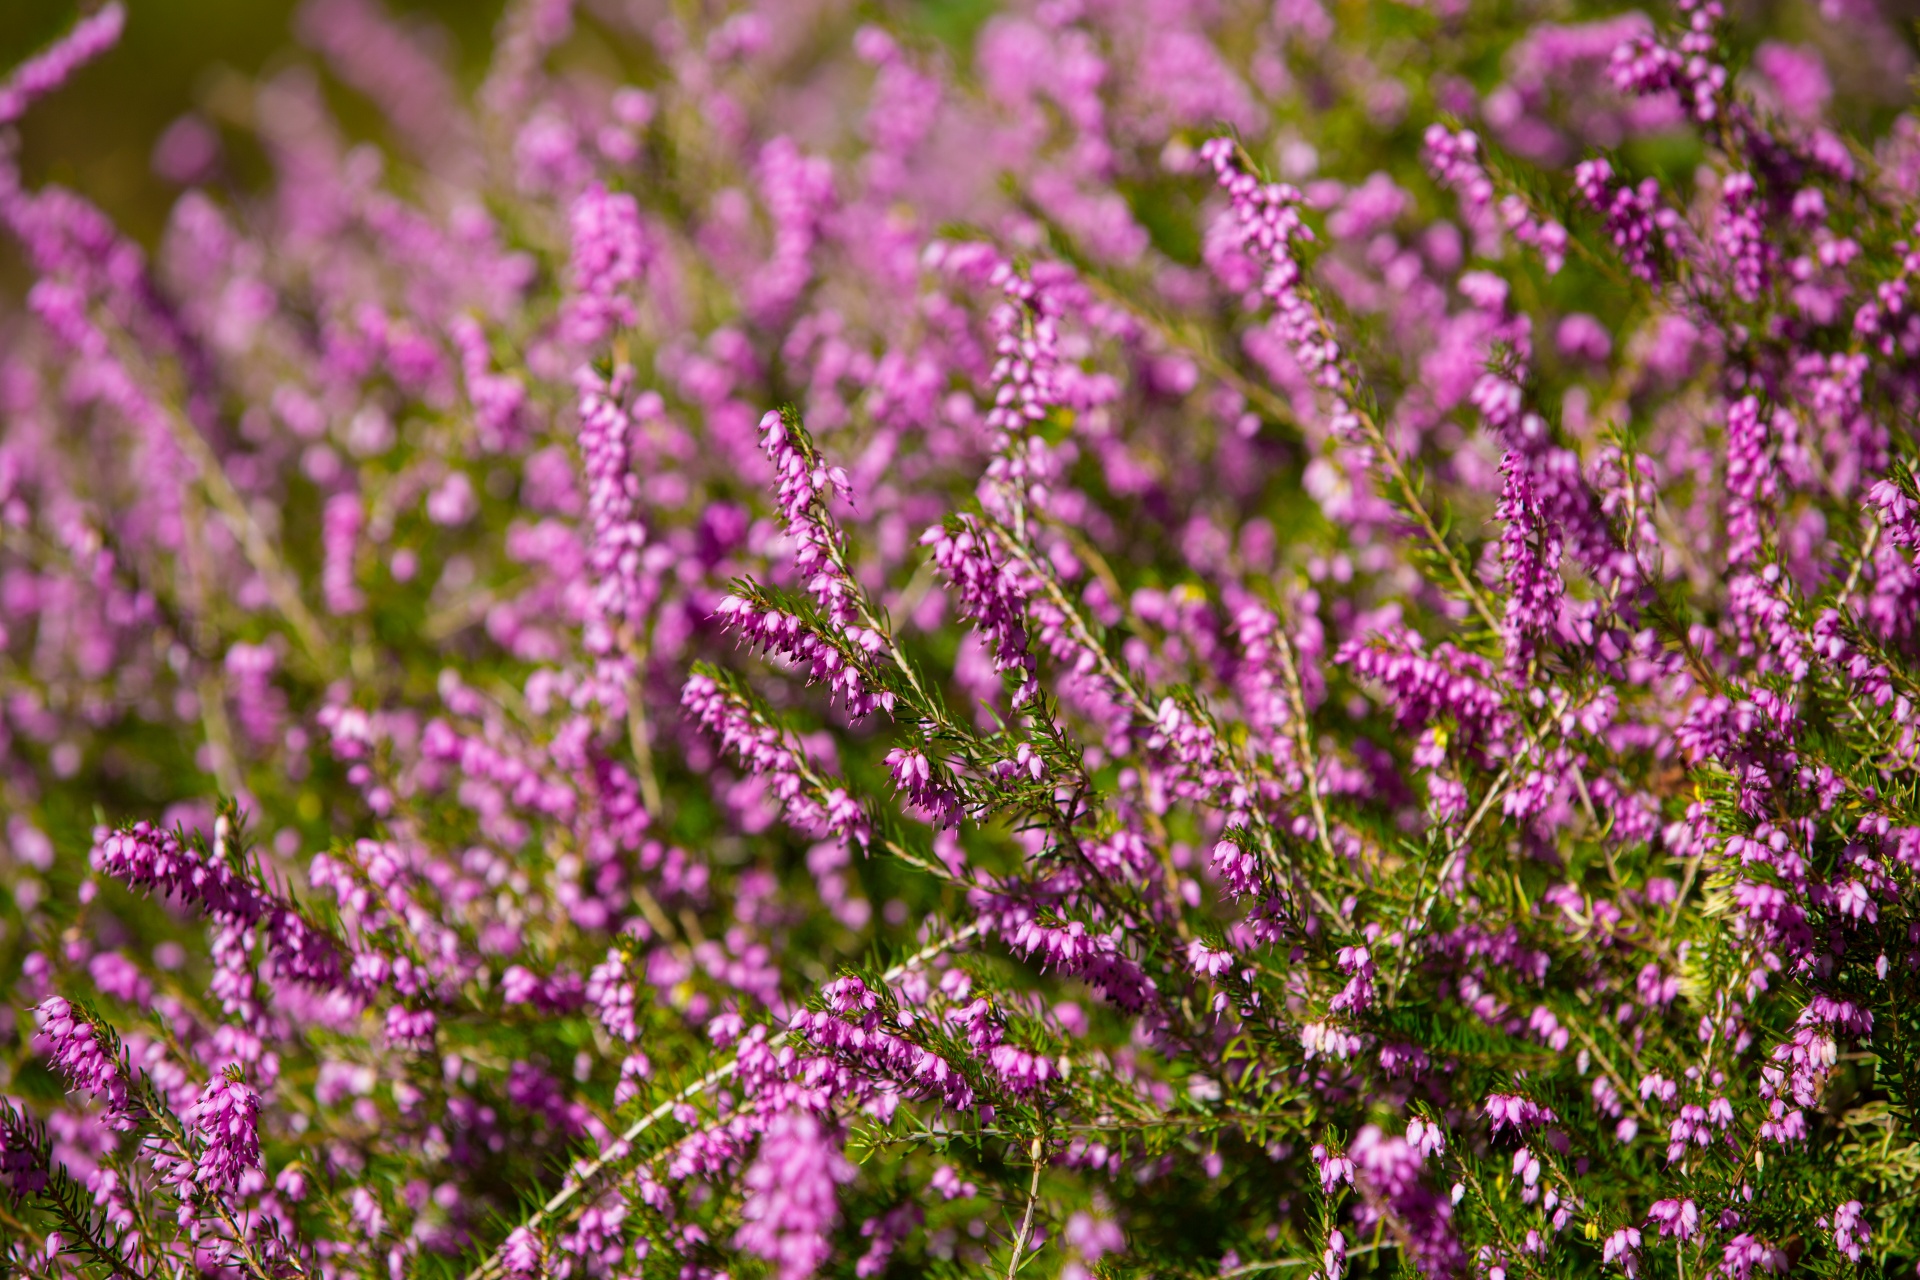 Photos of Nature: Photos Of Heather Flowers